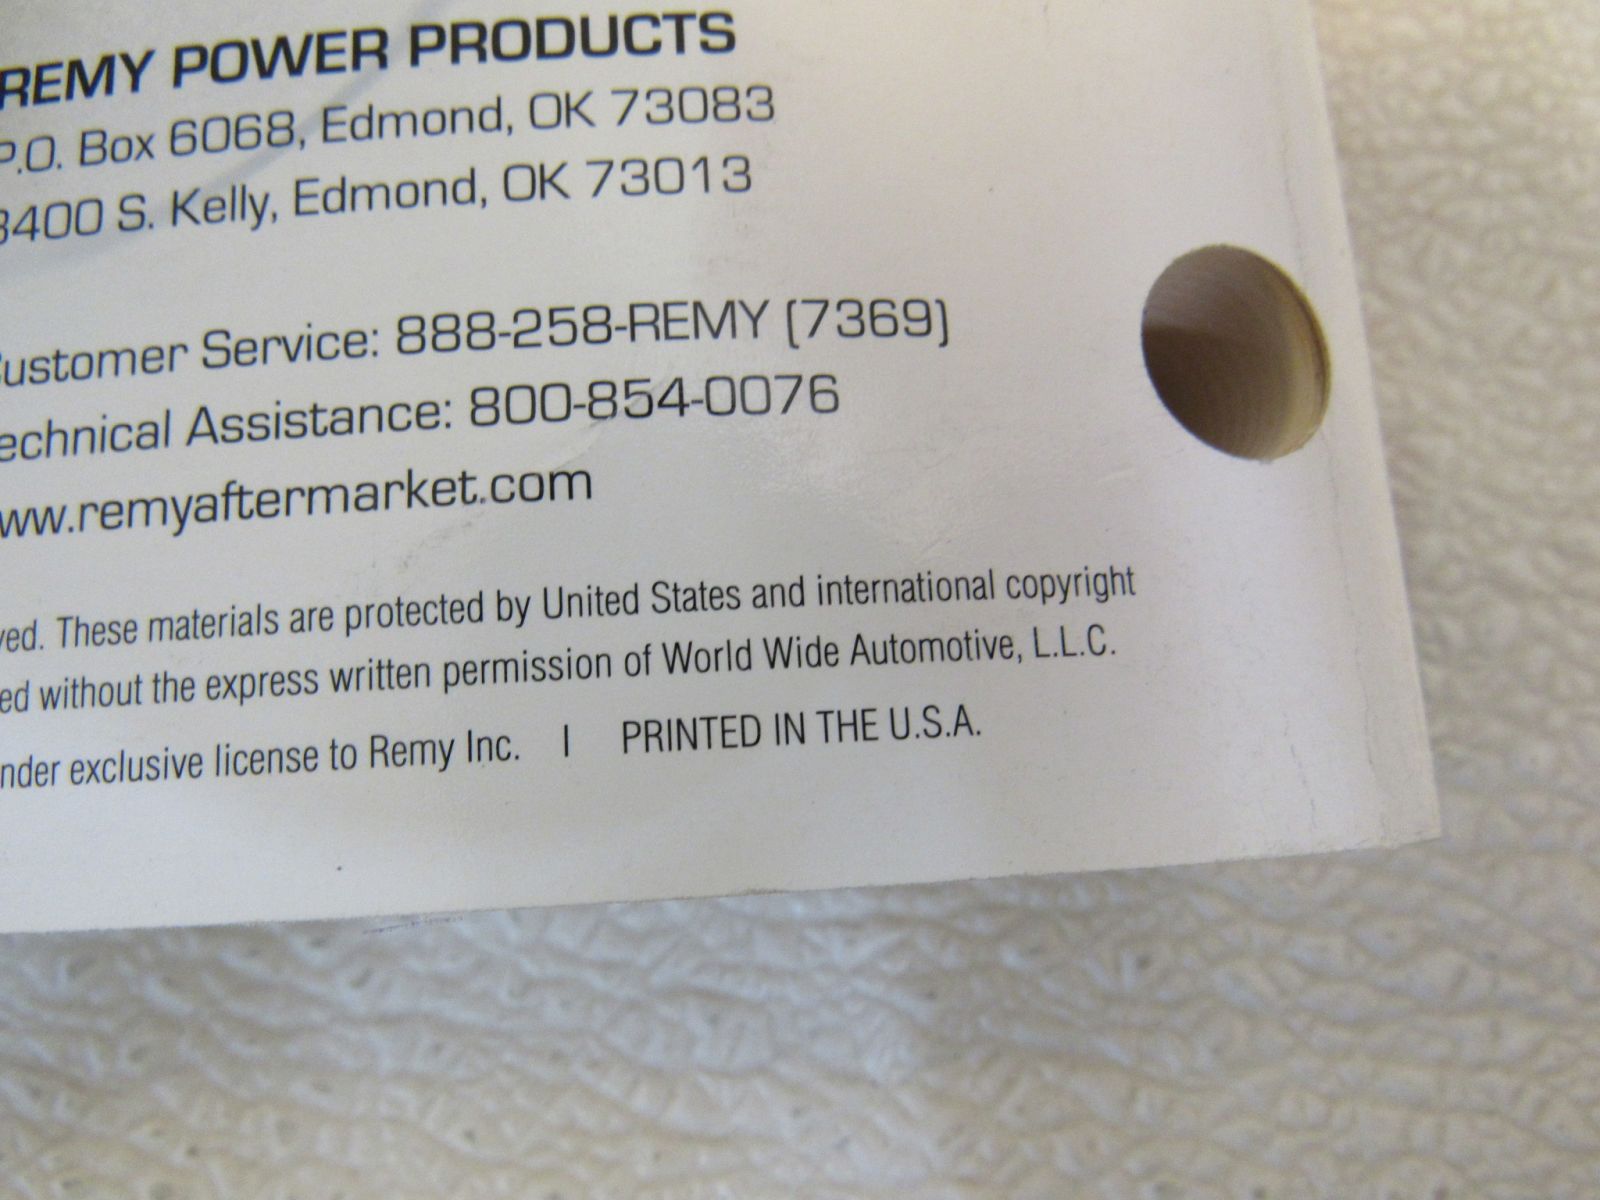 World Wide Automotive LLC Delco Remy Heavy Duty Small Motor Electrical Products -- Used